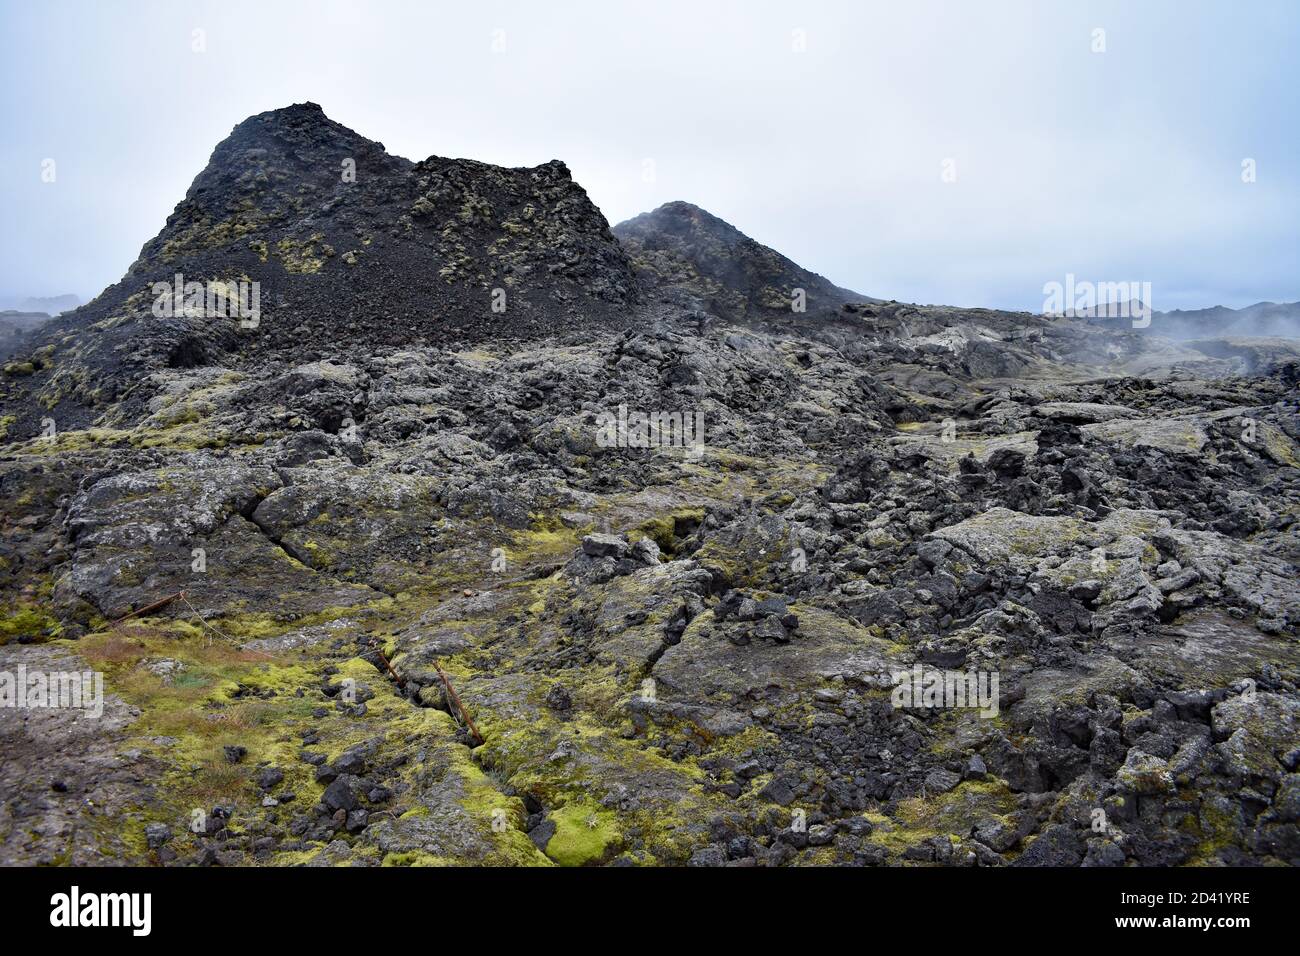 Steam rises from the ground in the Krafla Lava Fields in the Lake Myvatn Area in North Iceland.  Green moss covers the black volcanic rock. Stock Photo